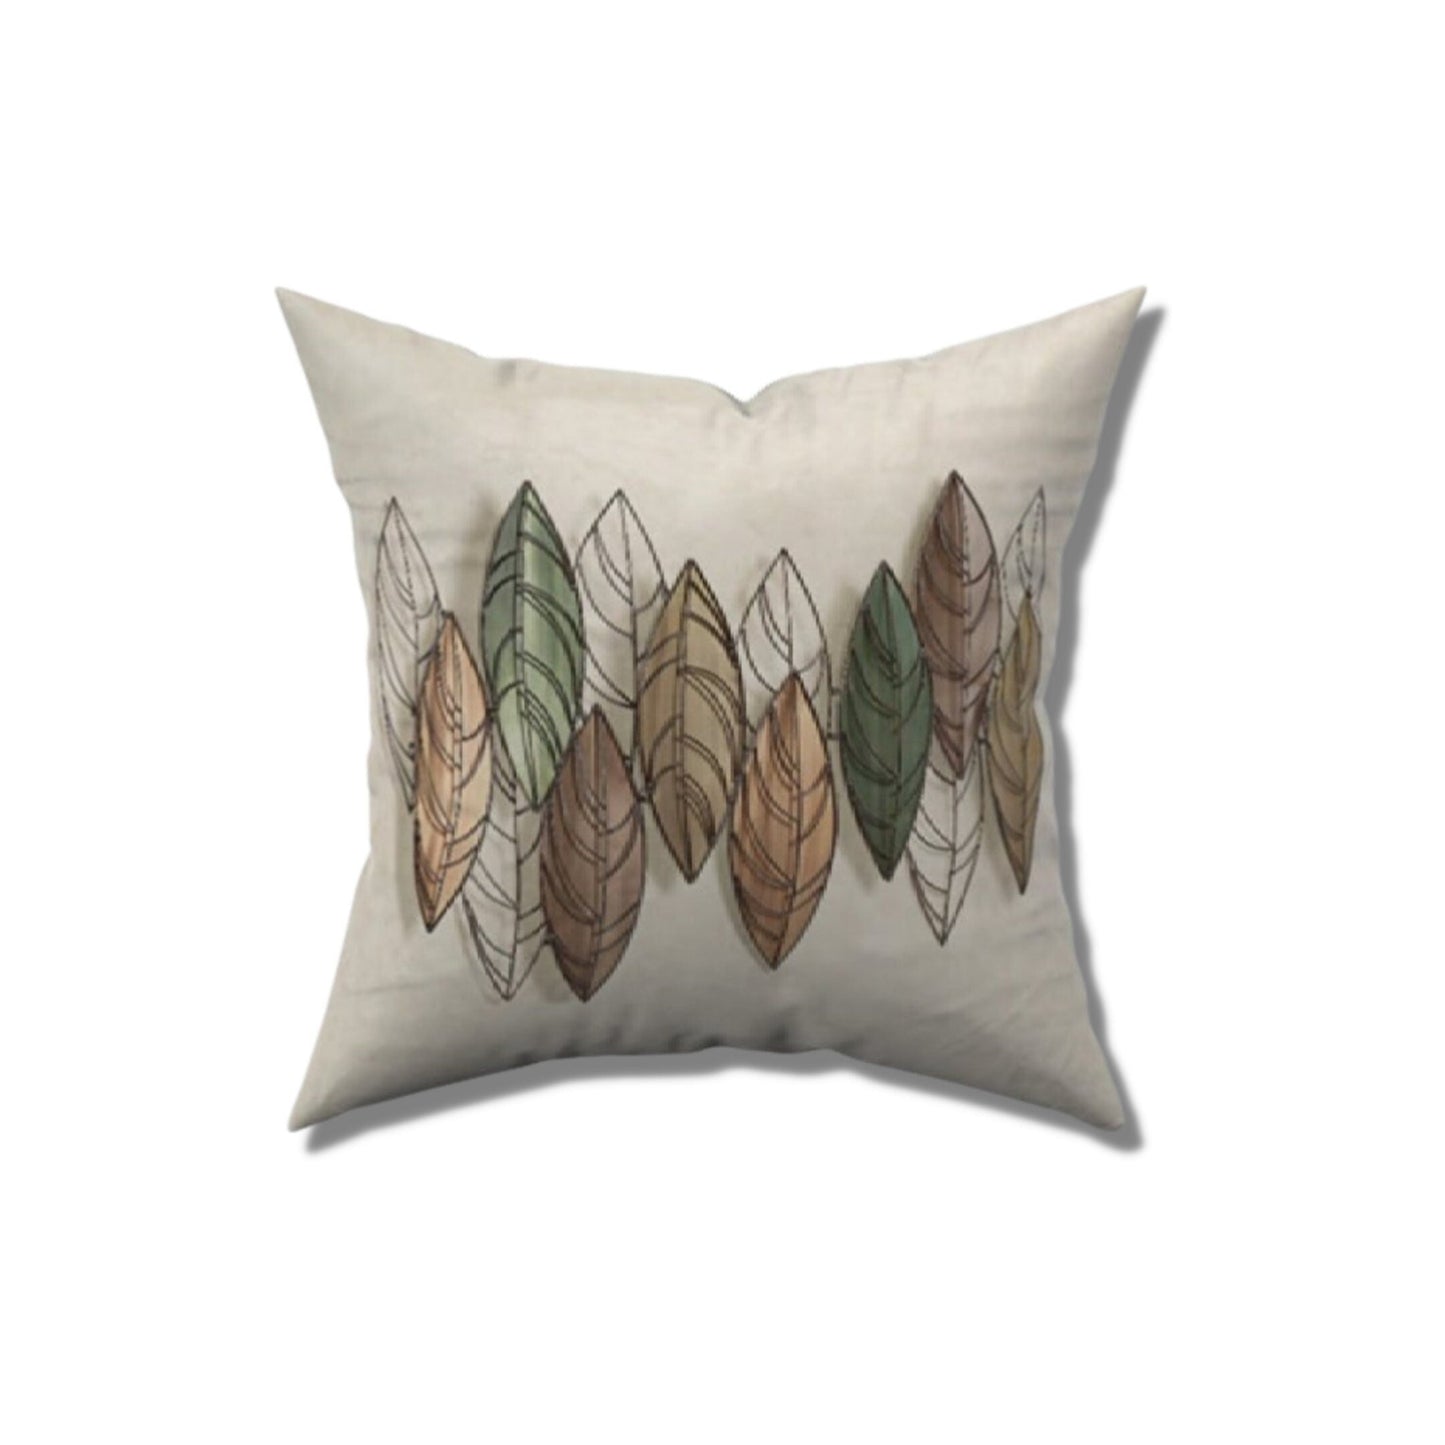 Set of 4, Coloured Leaves Patterned 3D Digital Printed Cushion on Cream Background - Pillow Case, 43 cm x 43 Cm - Babila Home